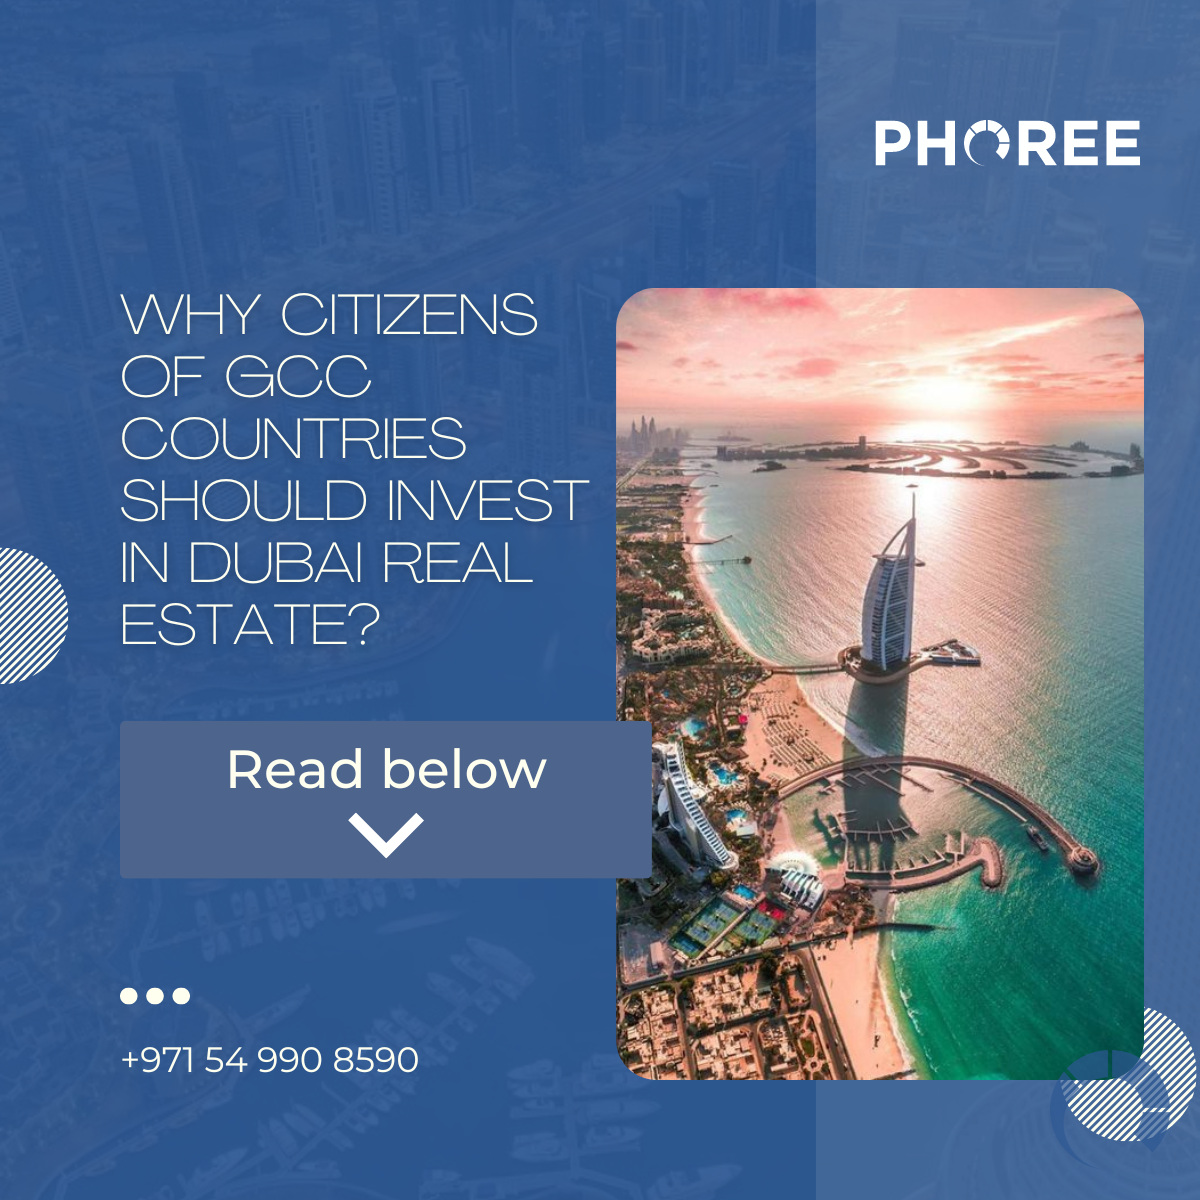 WHY CITIZENS OF GCC COUNTRIES SHOULD INVEST IN DUBAI REAL ESTATE